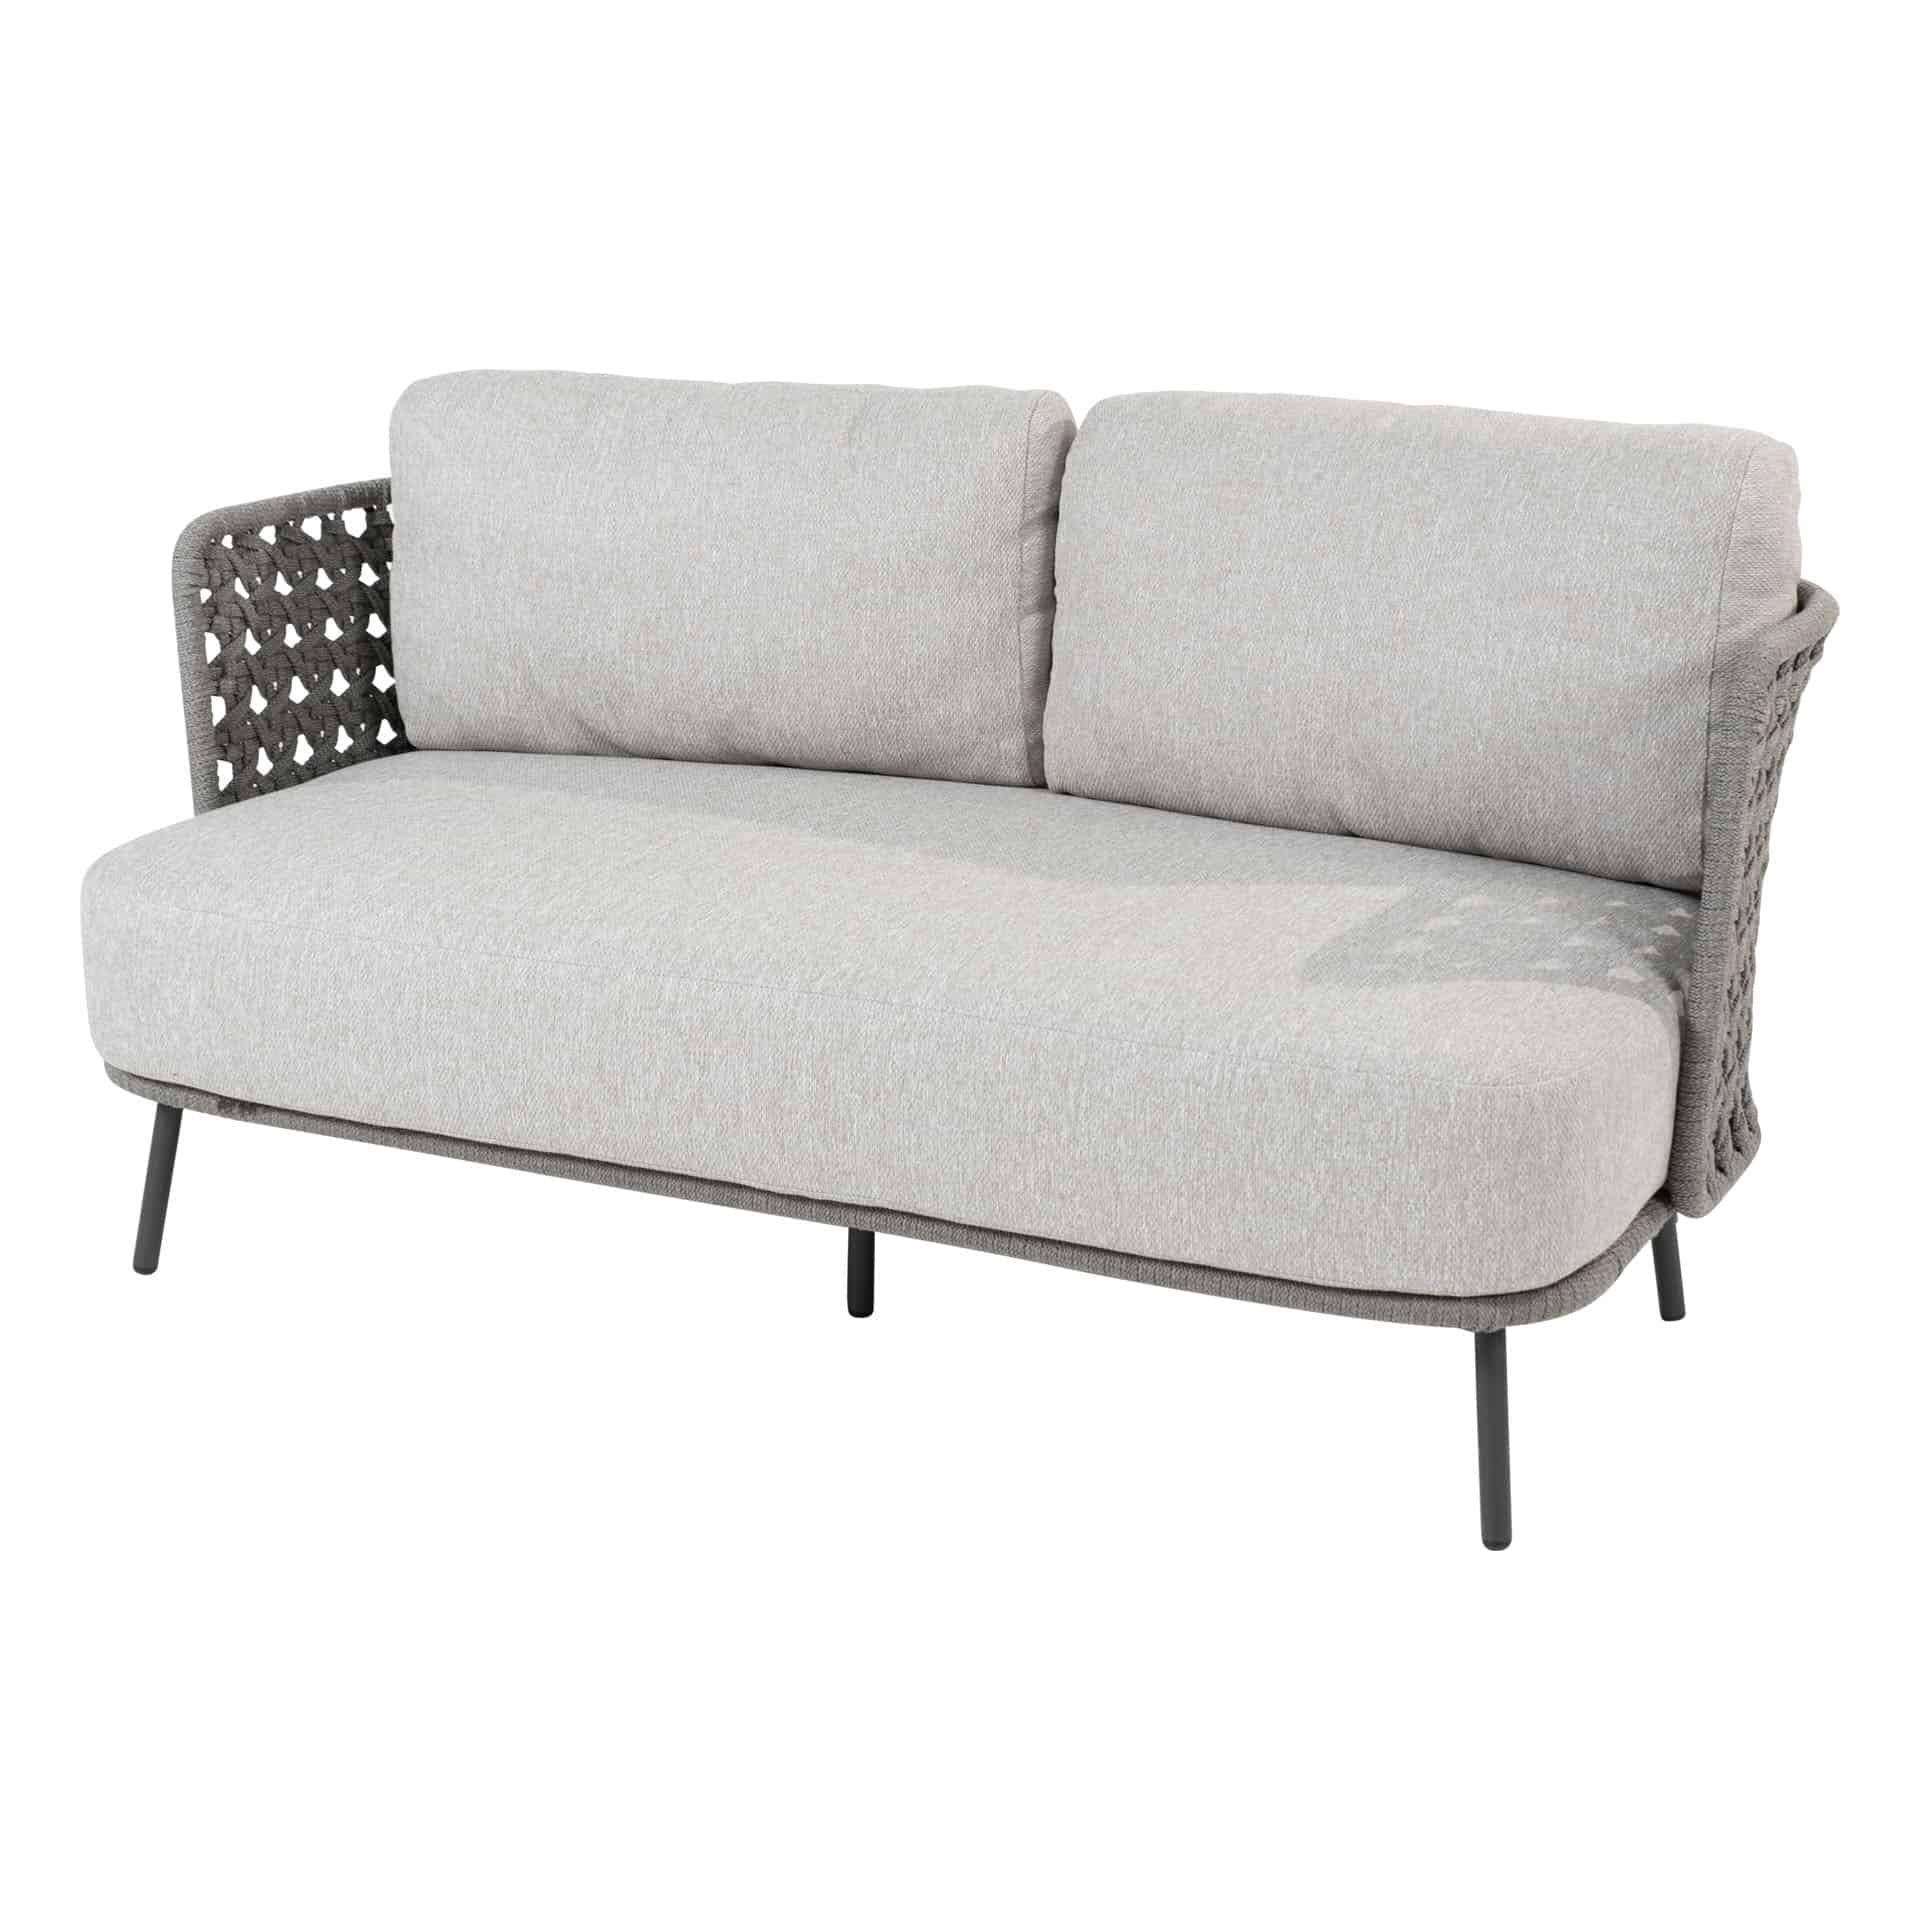 213909_-Palacio-living-bench-2.5-seater-silvergrey-with-3-cushions-01